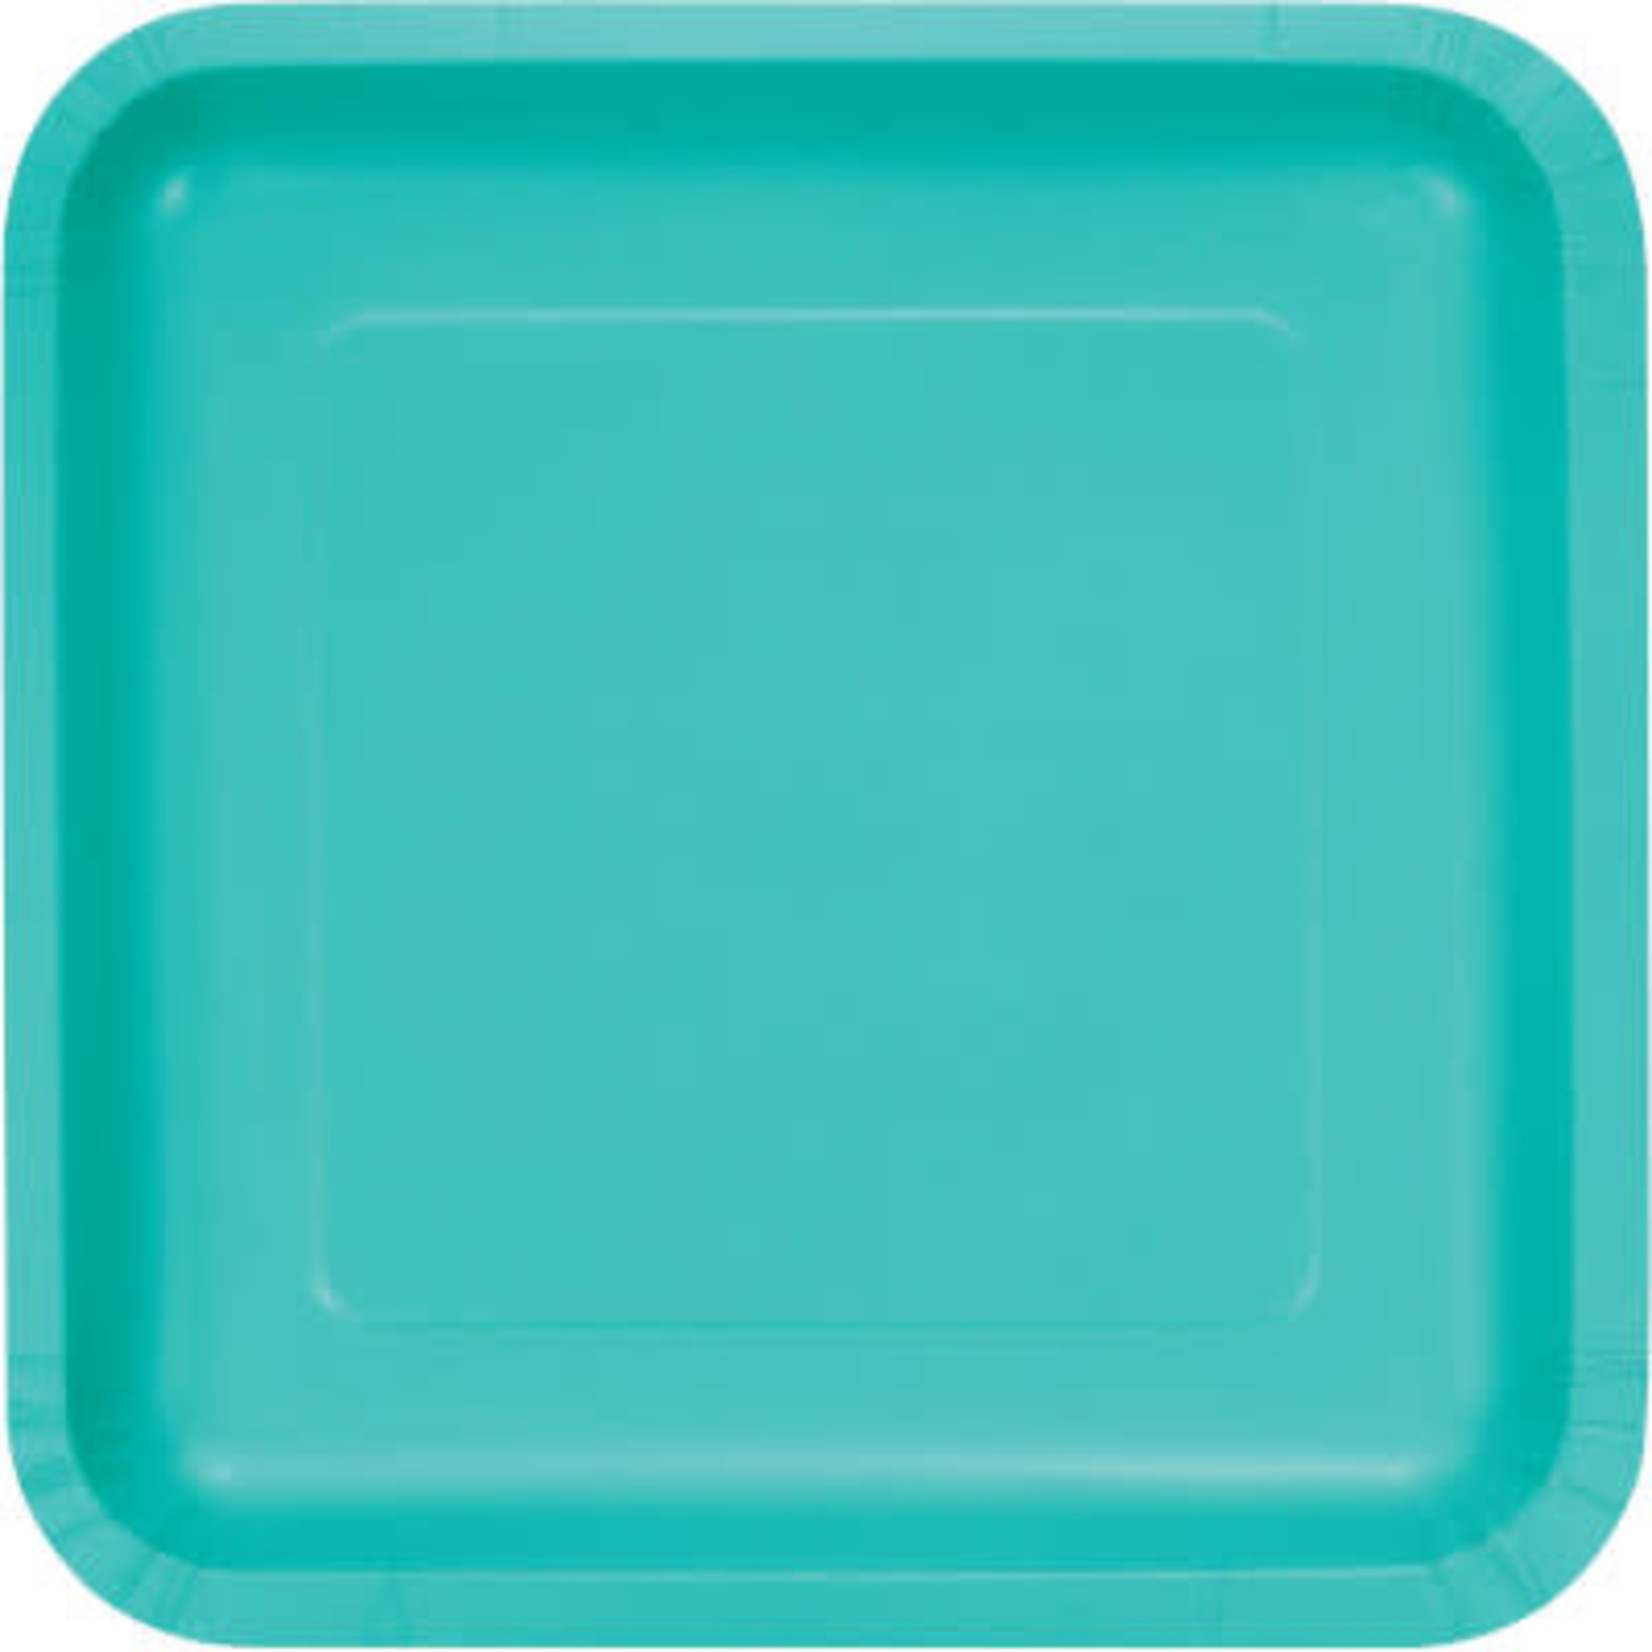 Touch of Color 9" Teal Lagoon Square Paper Plates - 18ct.